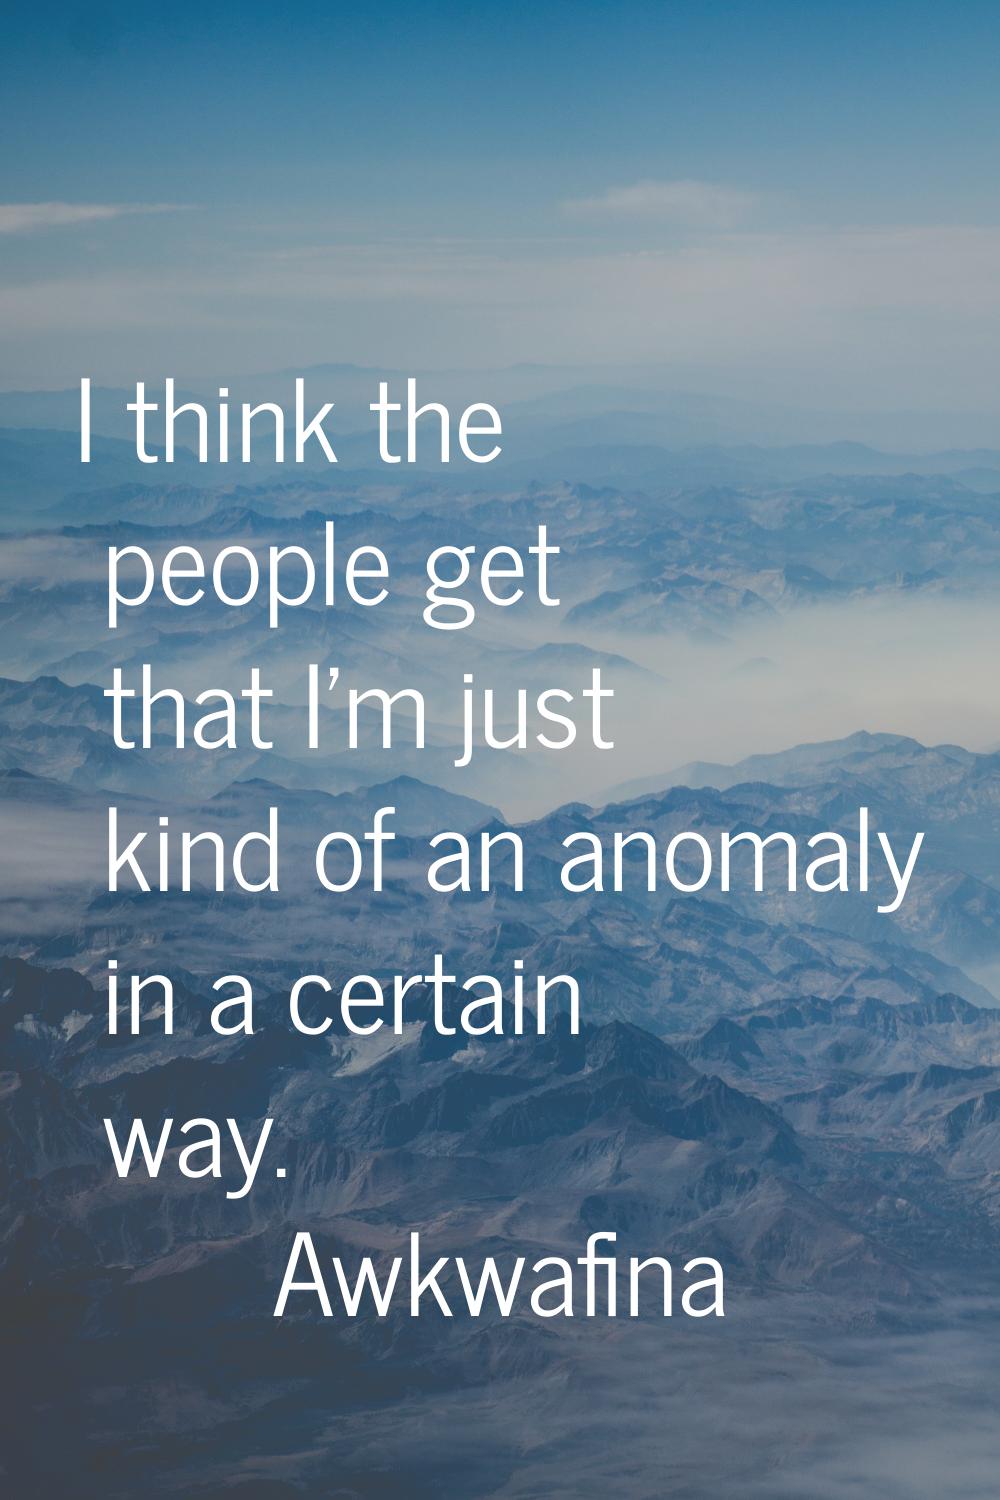 I think the people get that I'm just kind of an anomaly in a certain way.